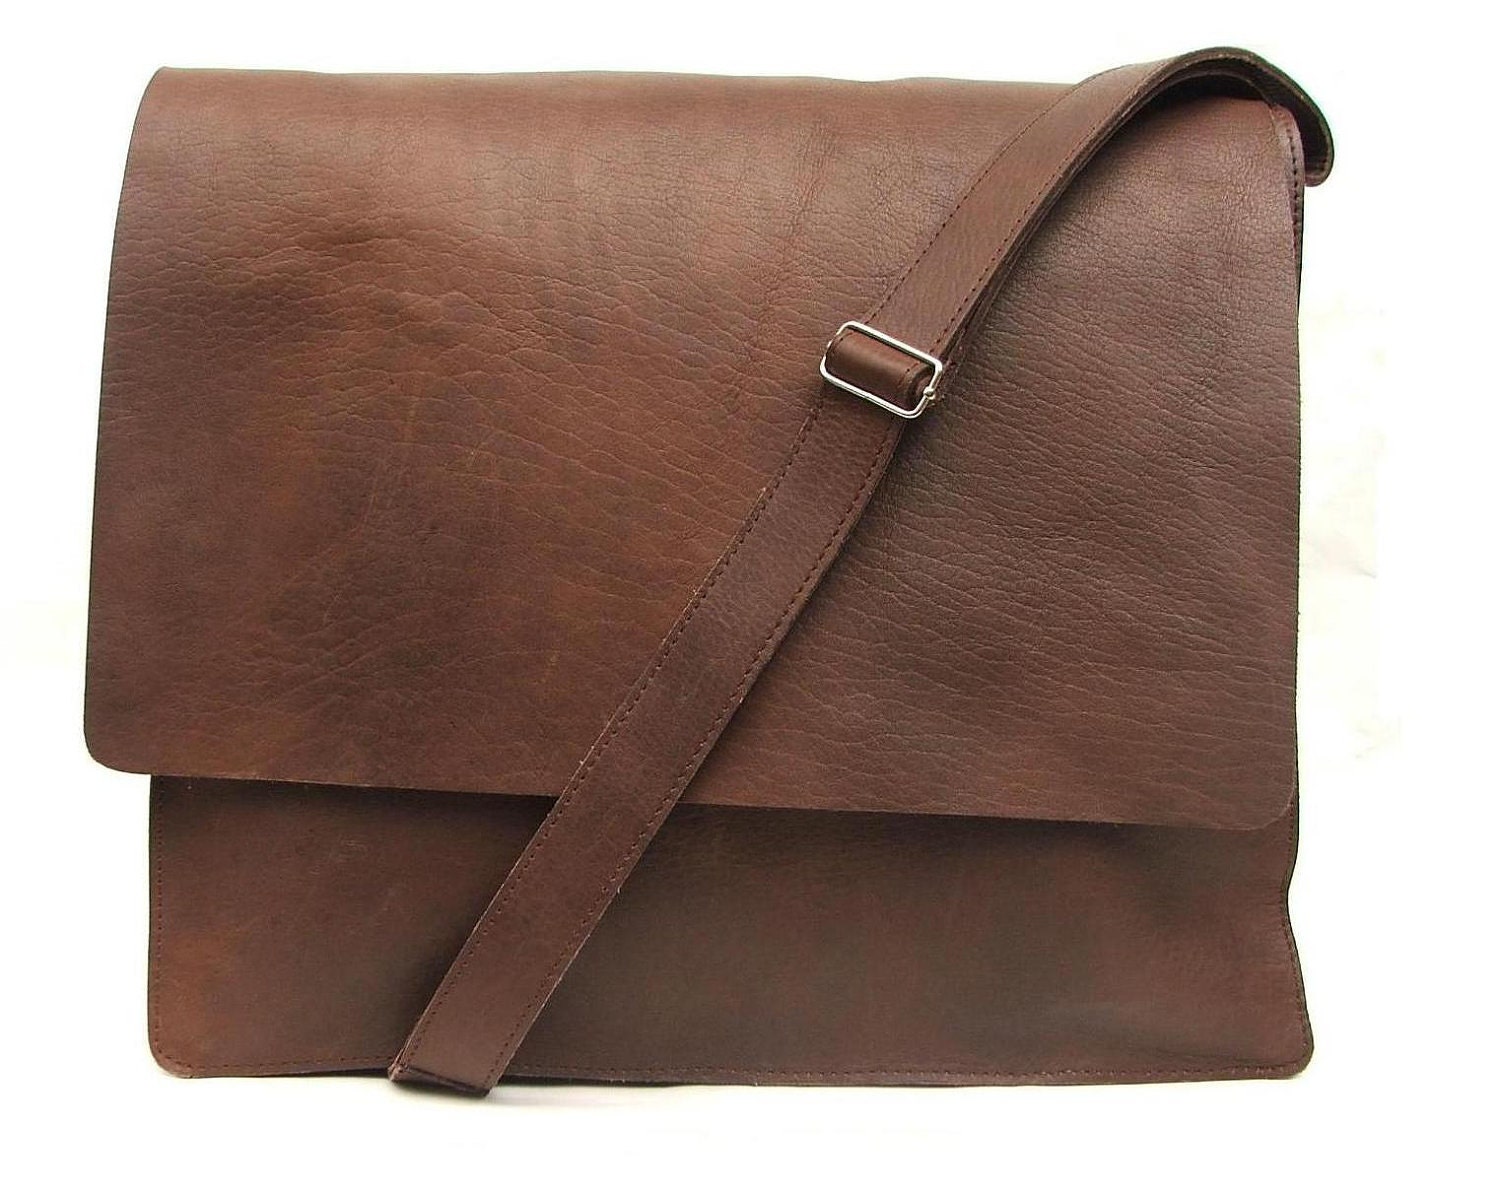 Messenger bag for Mens Women Unisex Brown Leather by abizema